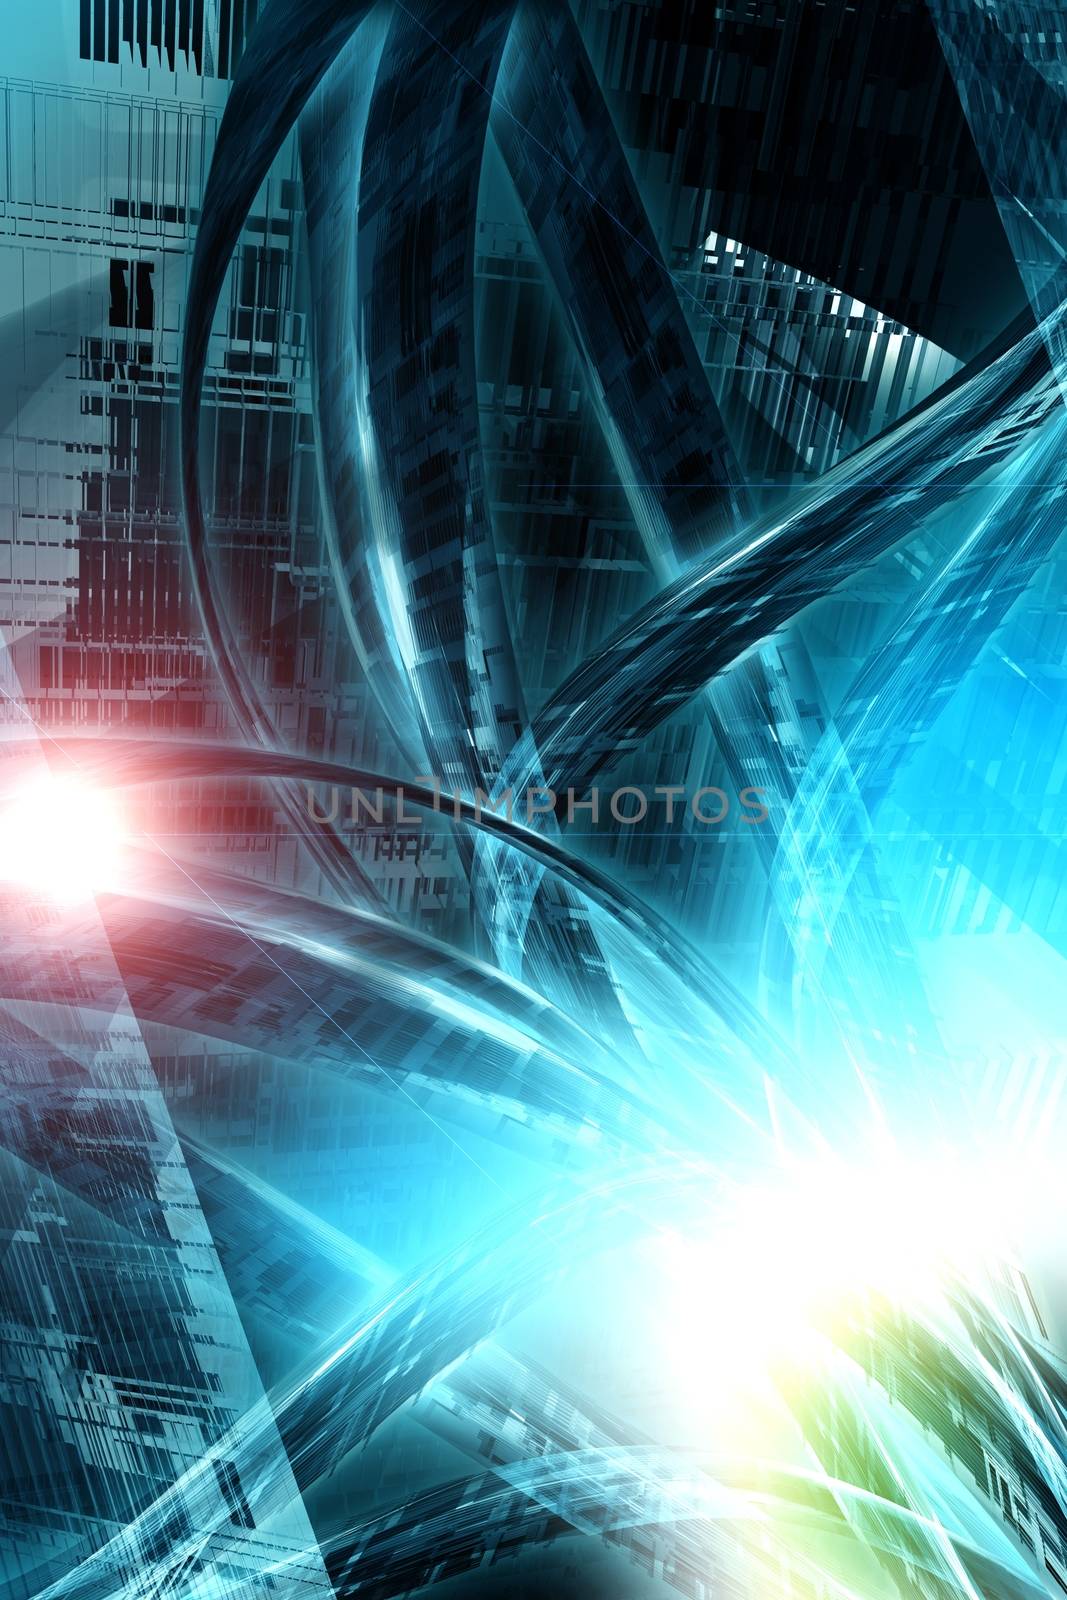 Digital City - Abstract Hi-Tech Concept with Large Data Cables and Flares. Great for Hosting Artwork Background or Logistic Companies. Vertical Design.